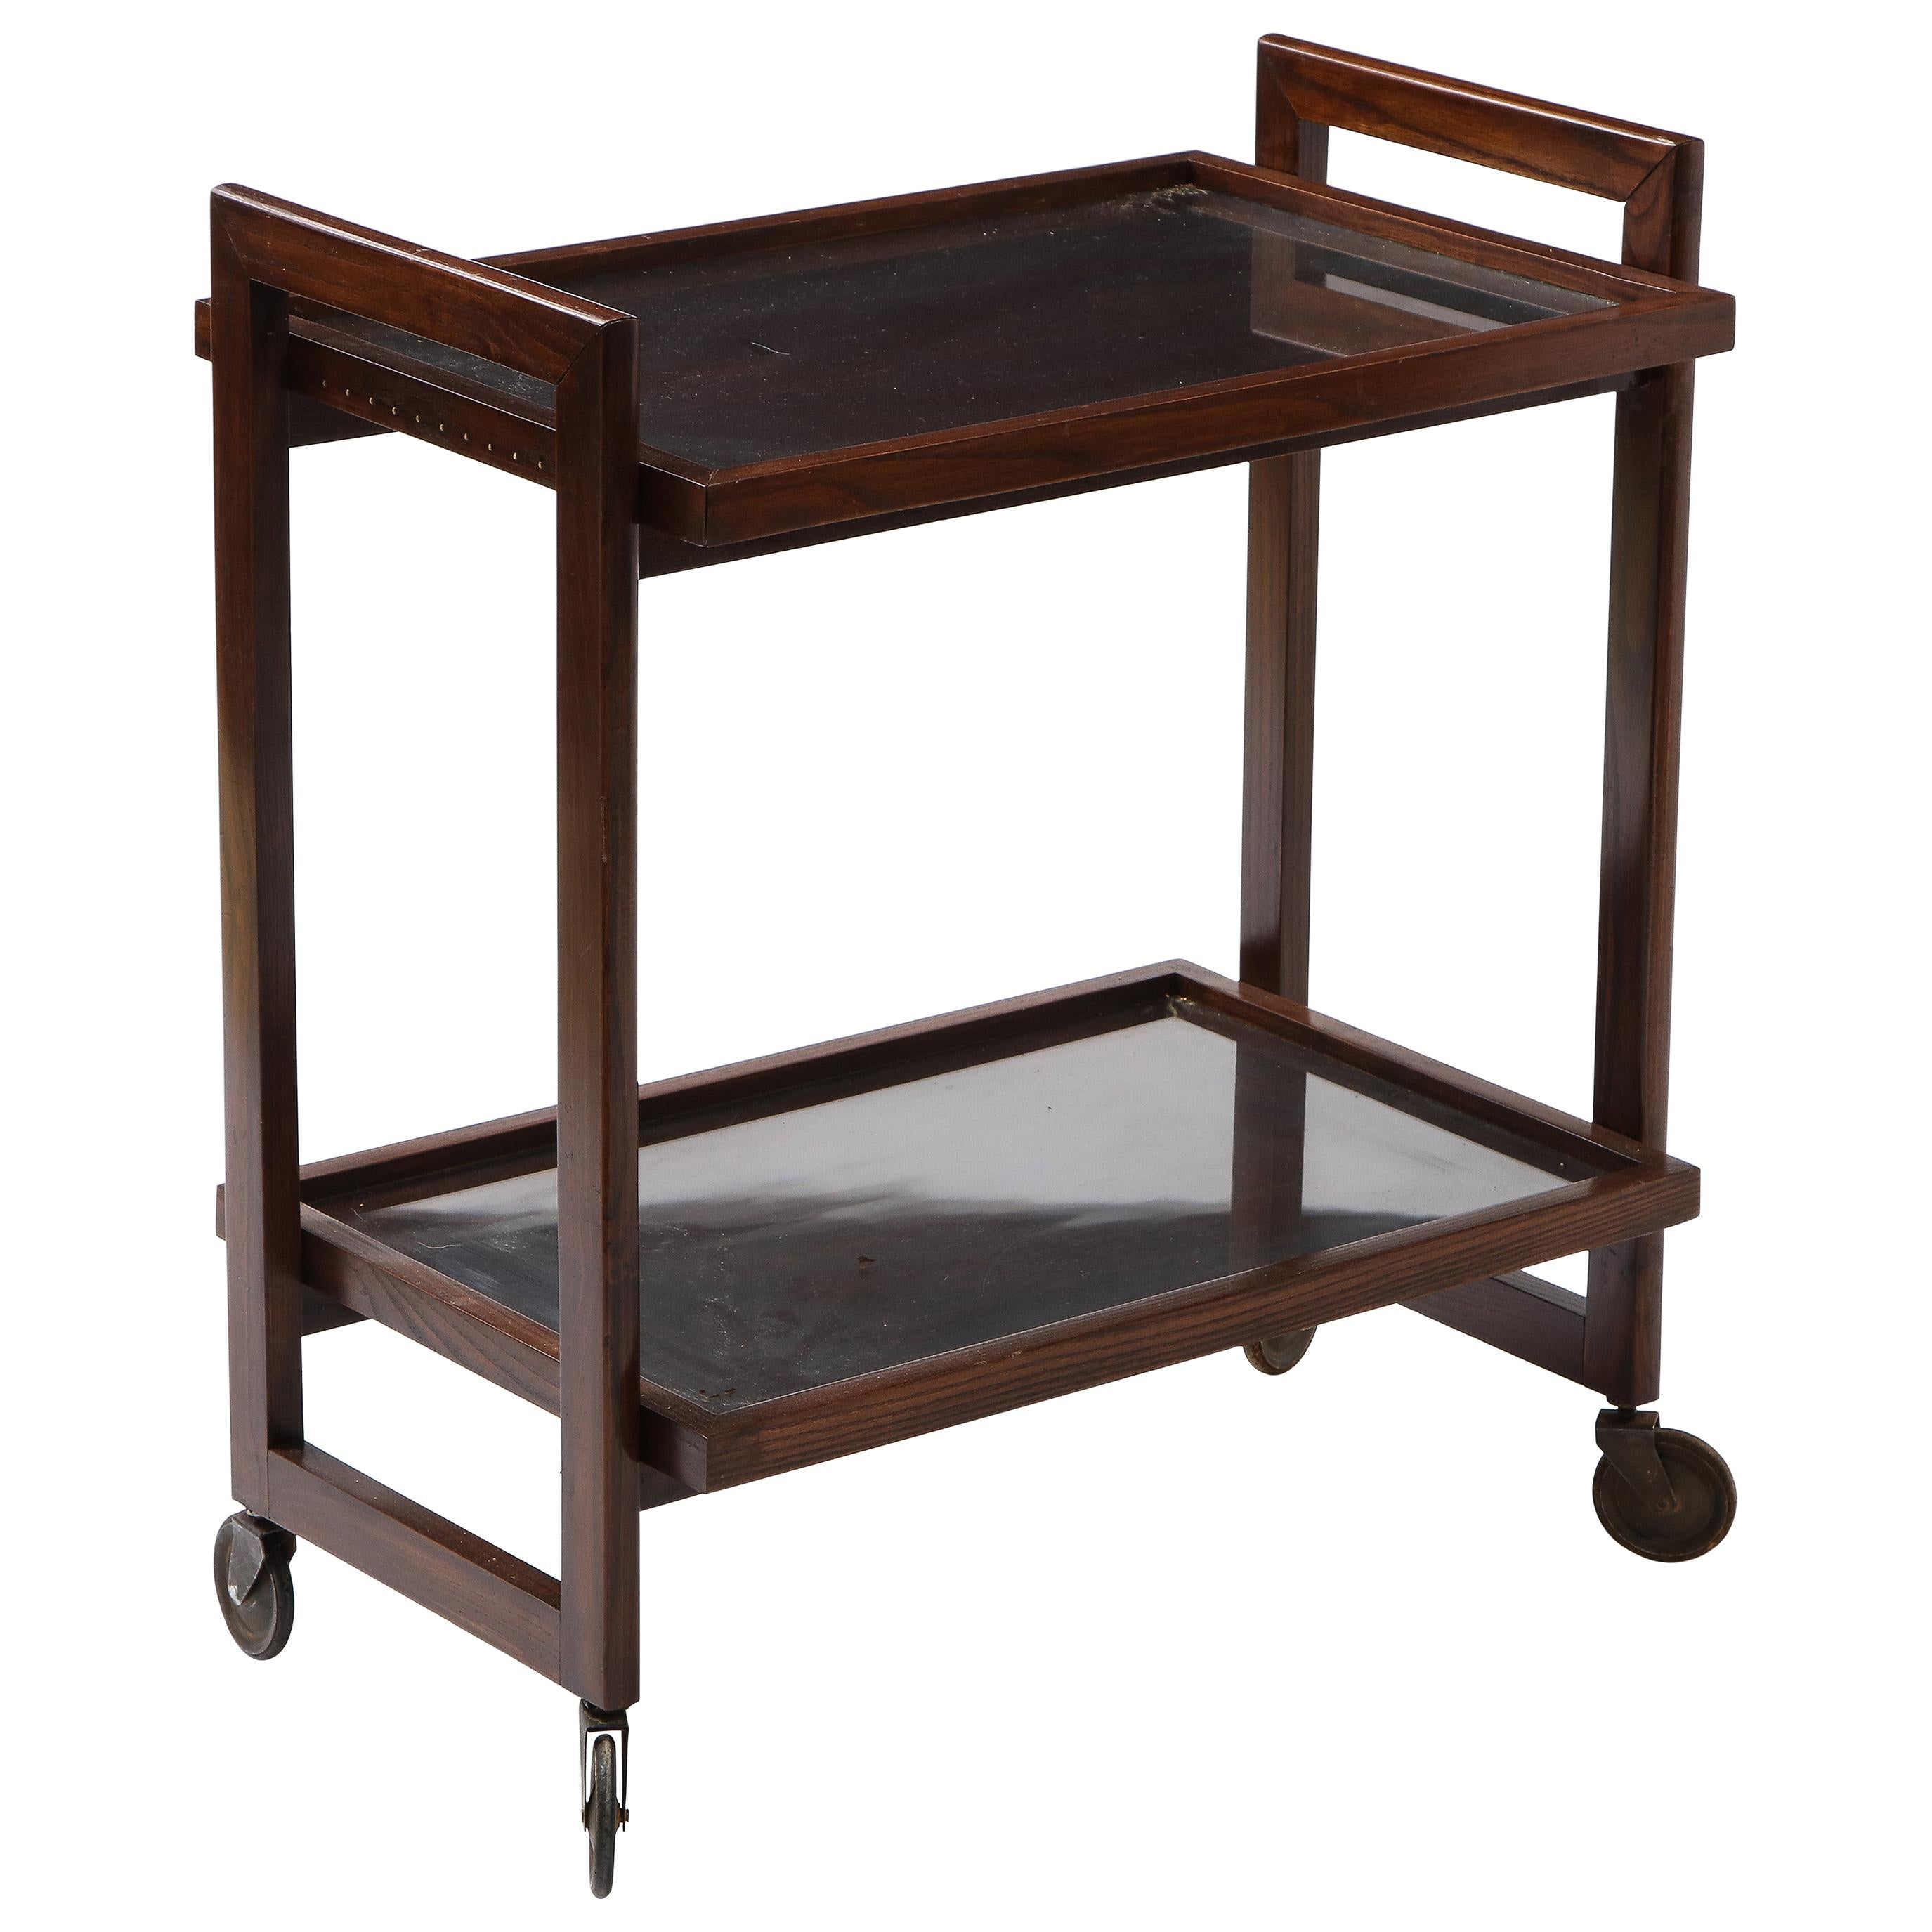 Elegant Andre Sornay bar cart in darkened Oregon pine on steel and rubber casters, each tray has an inset glass piece protecting the wood for use. The sides have a discreet line of embedded copper nails, the classic signature flourish of Sornay.